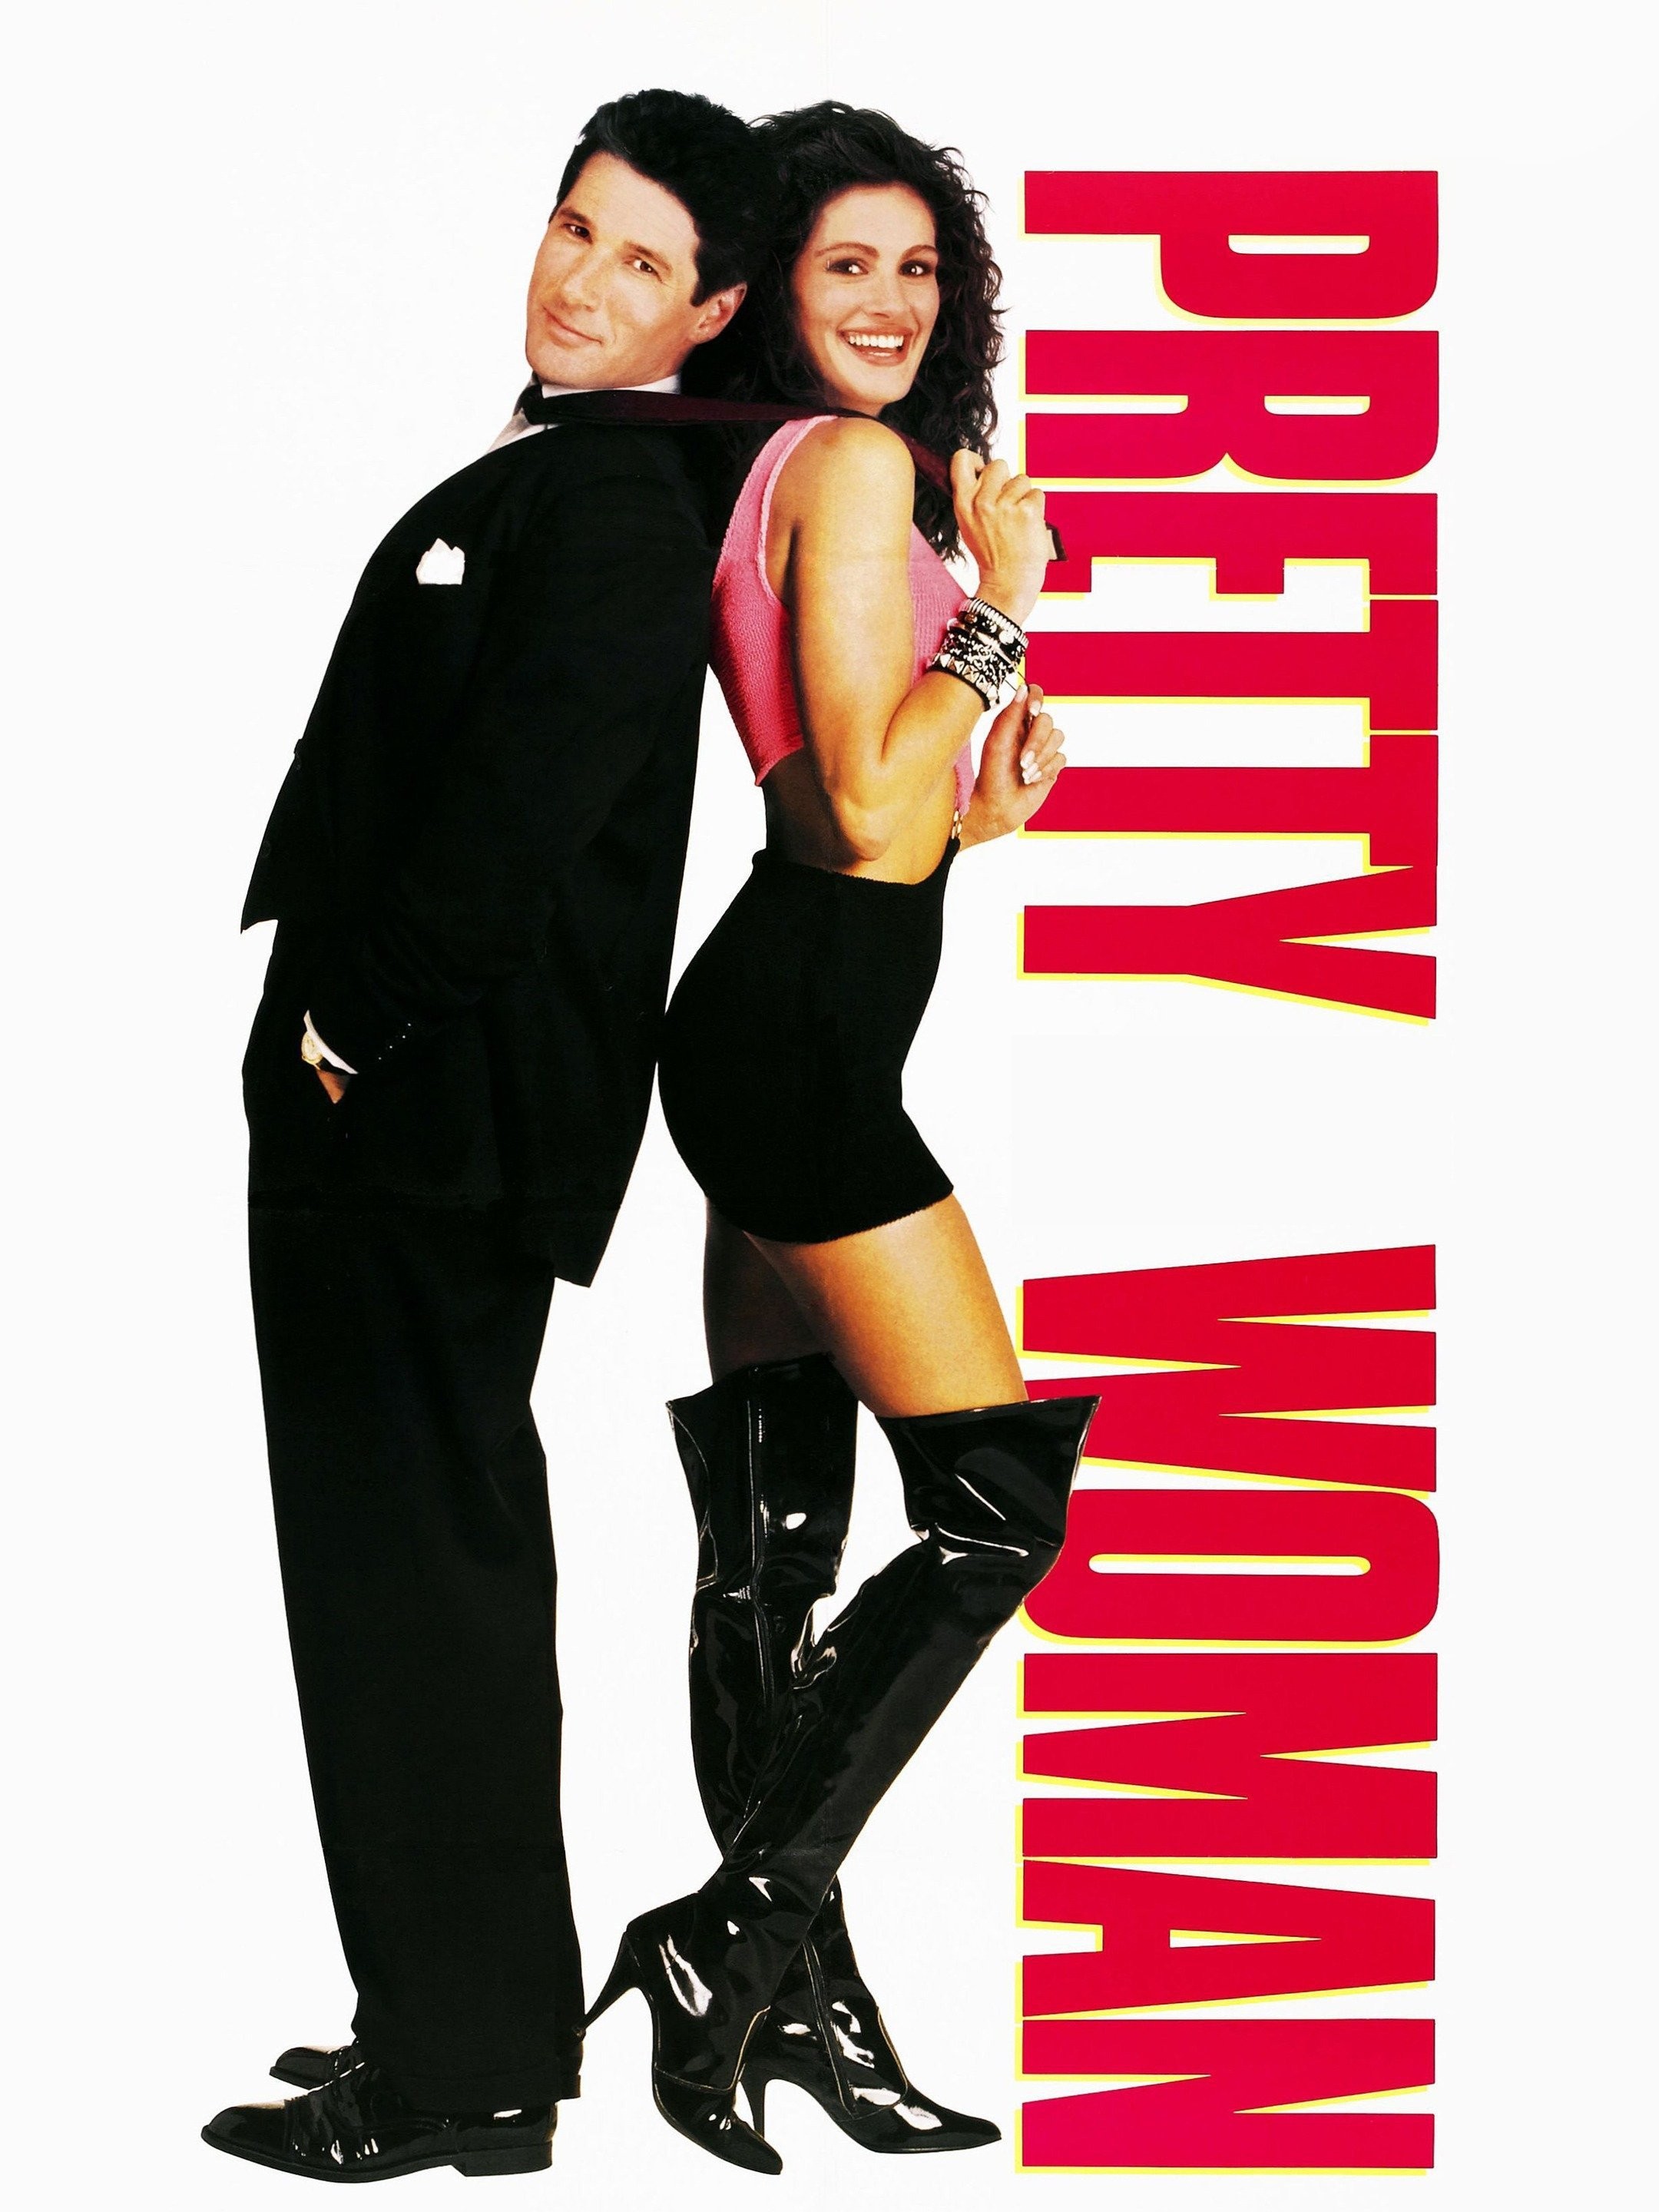 20 Best Quotes From Pretty Woman